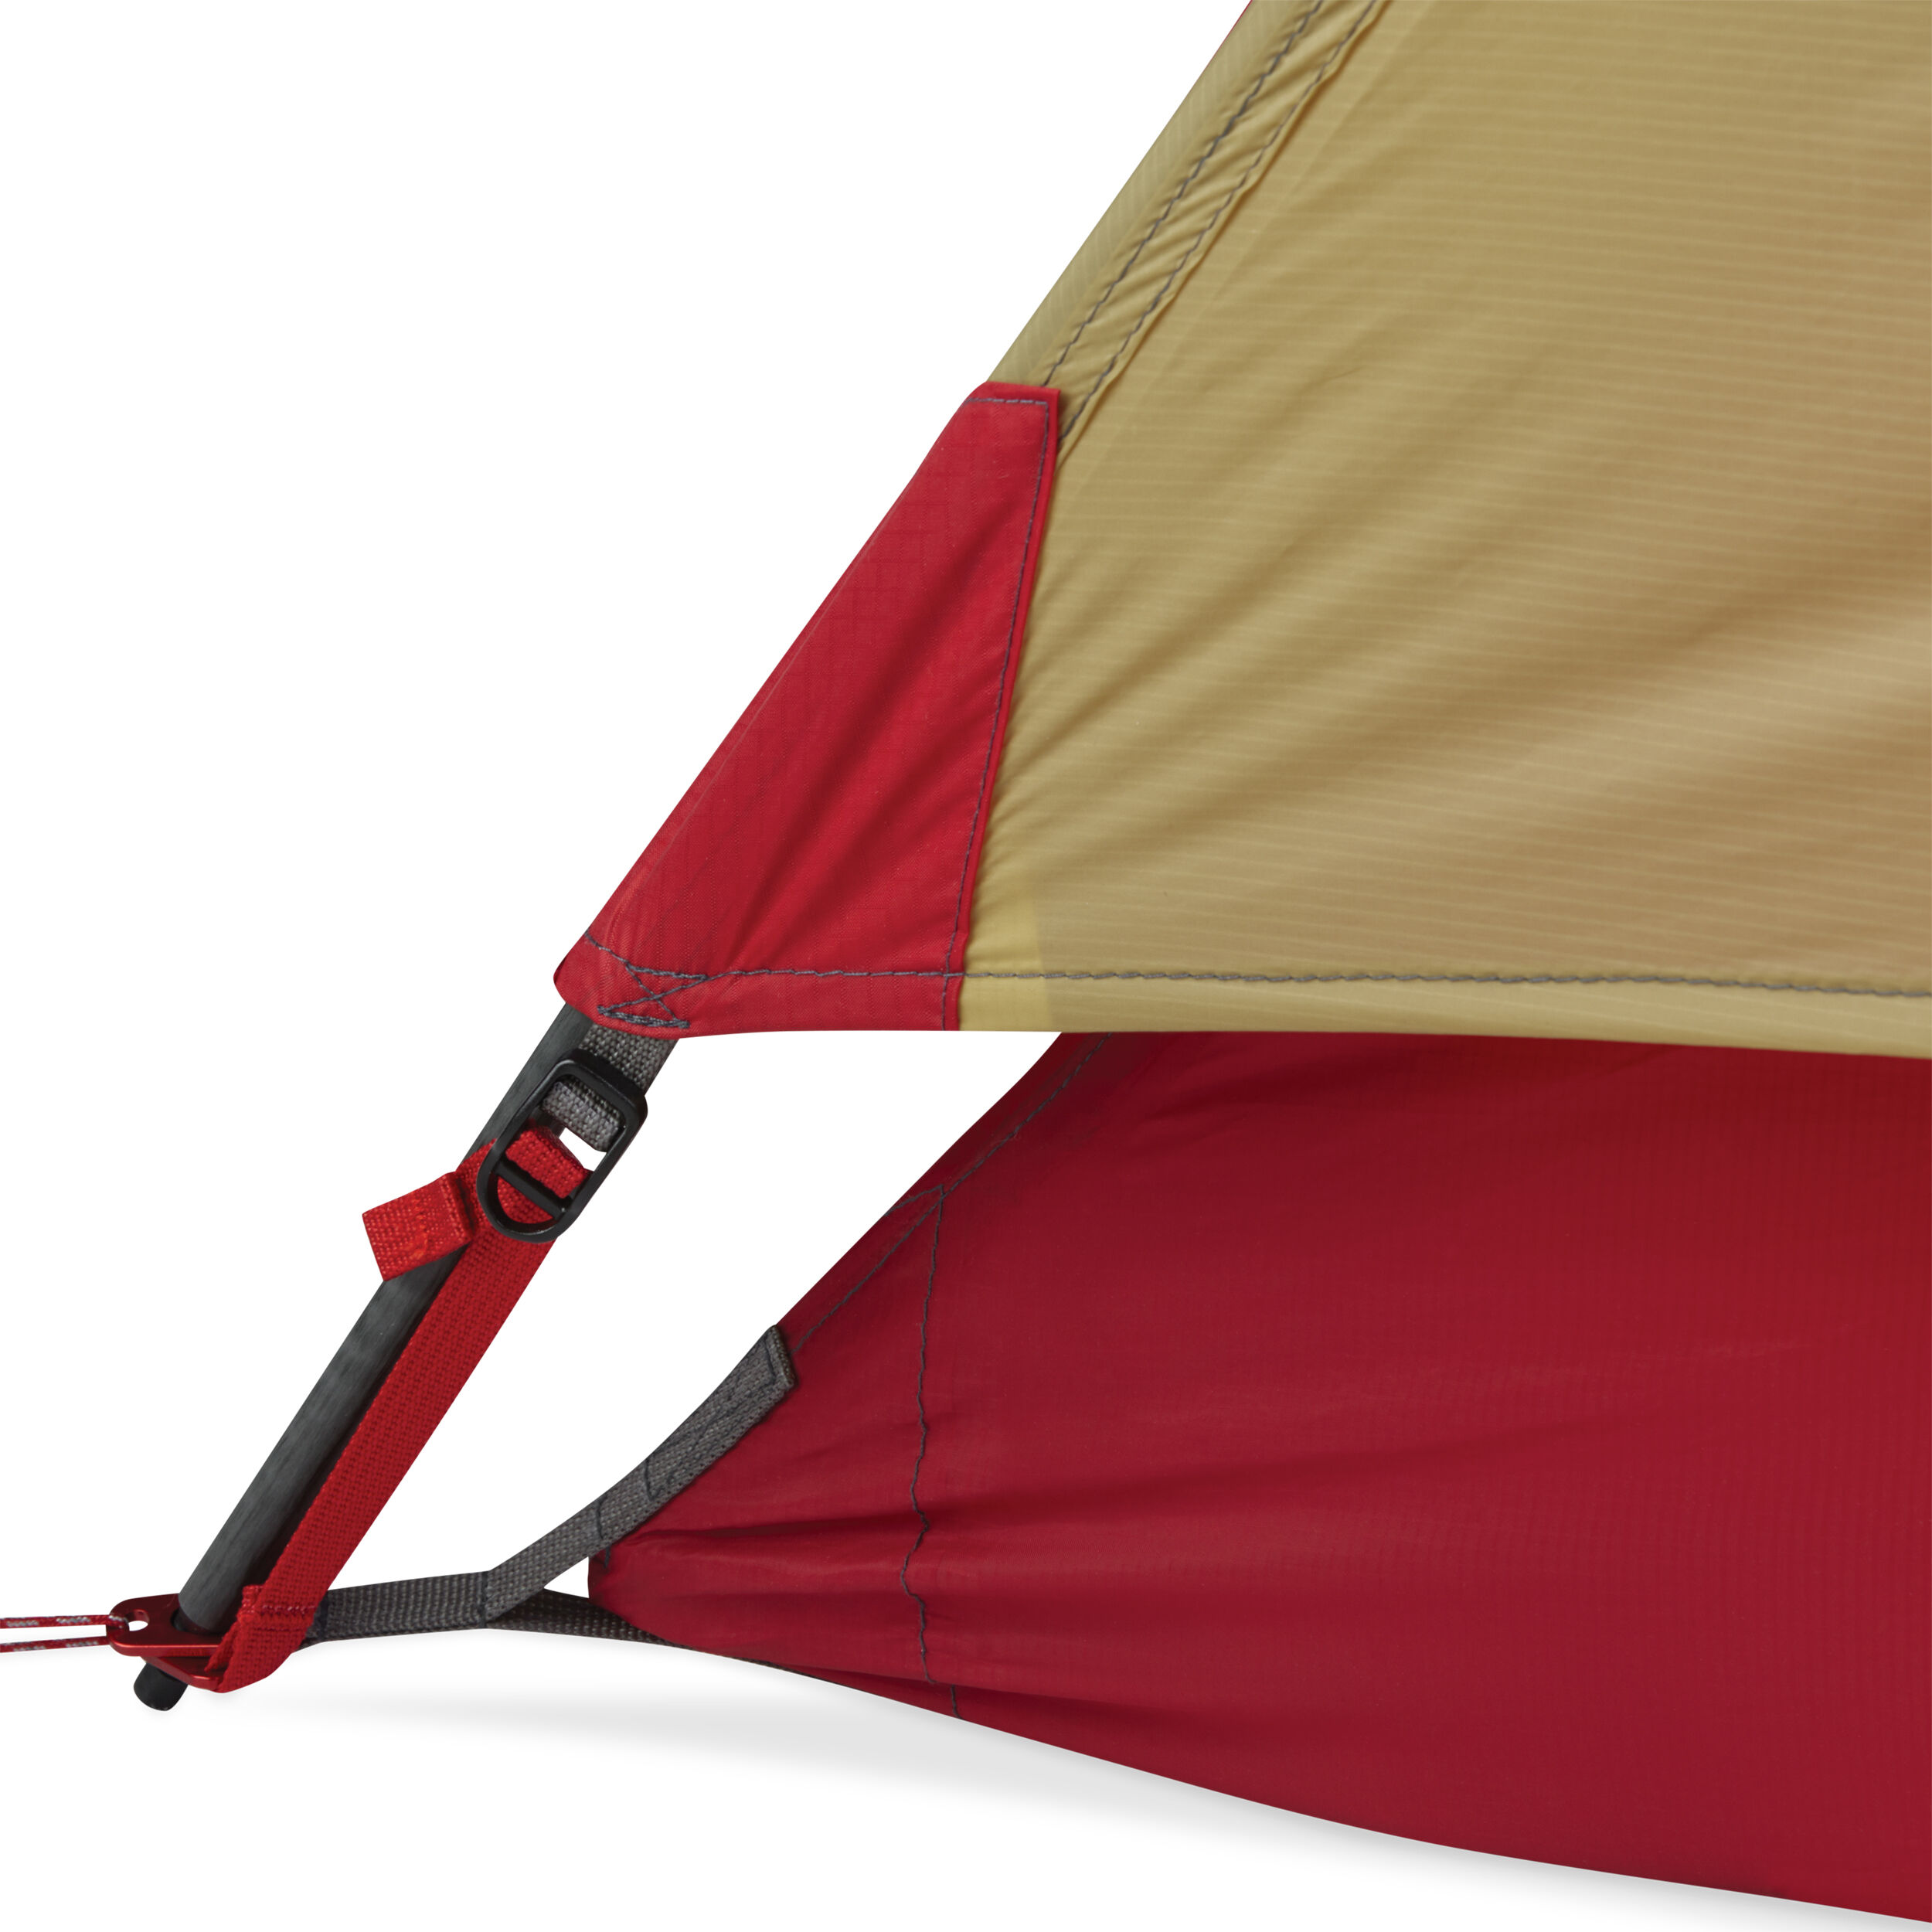 Hubba Hubba™ 1 Legendary 1-Person Backpacking Tent | MSR®